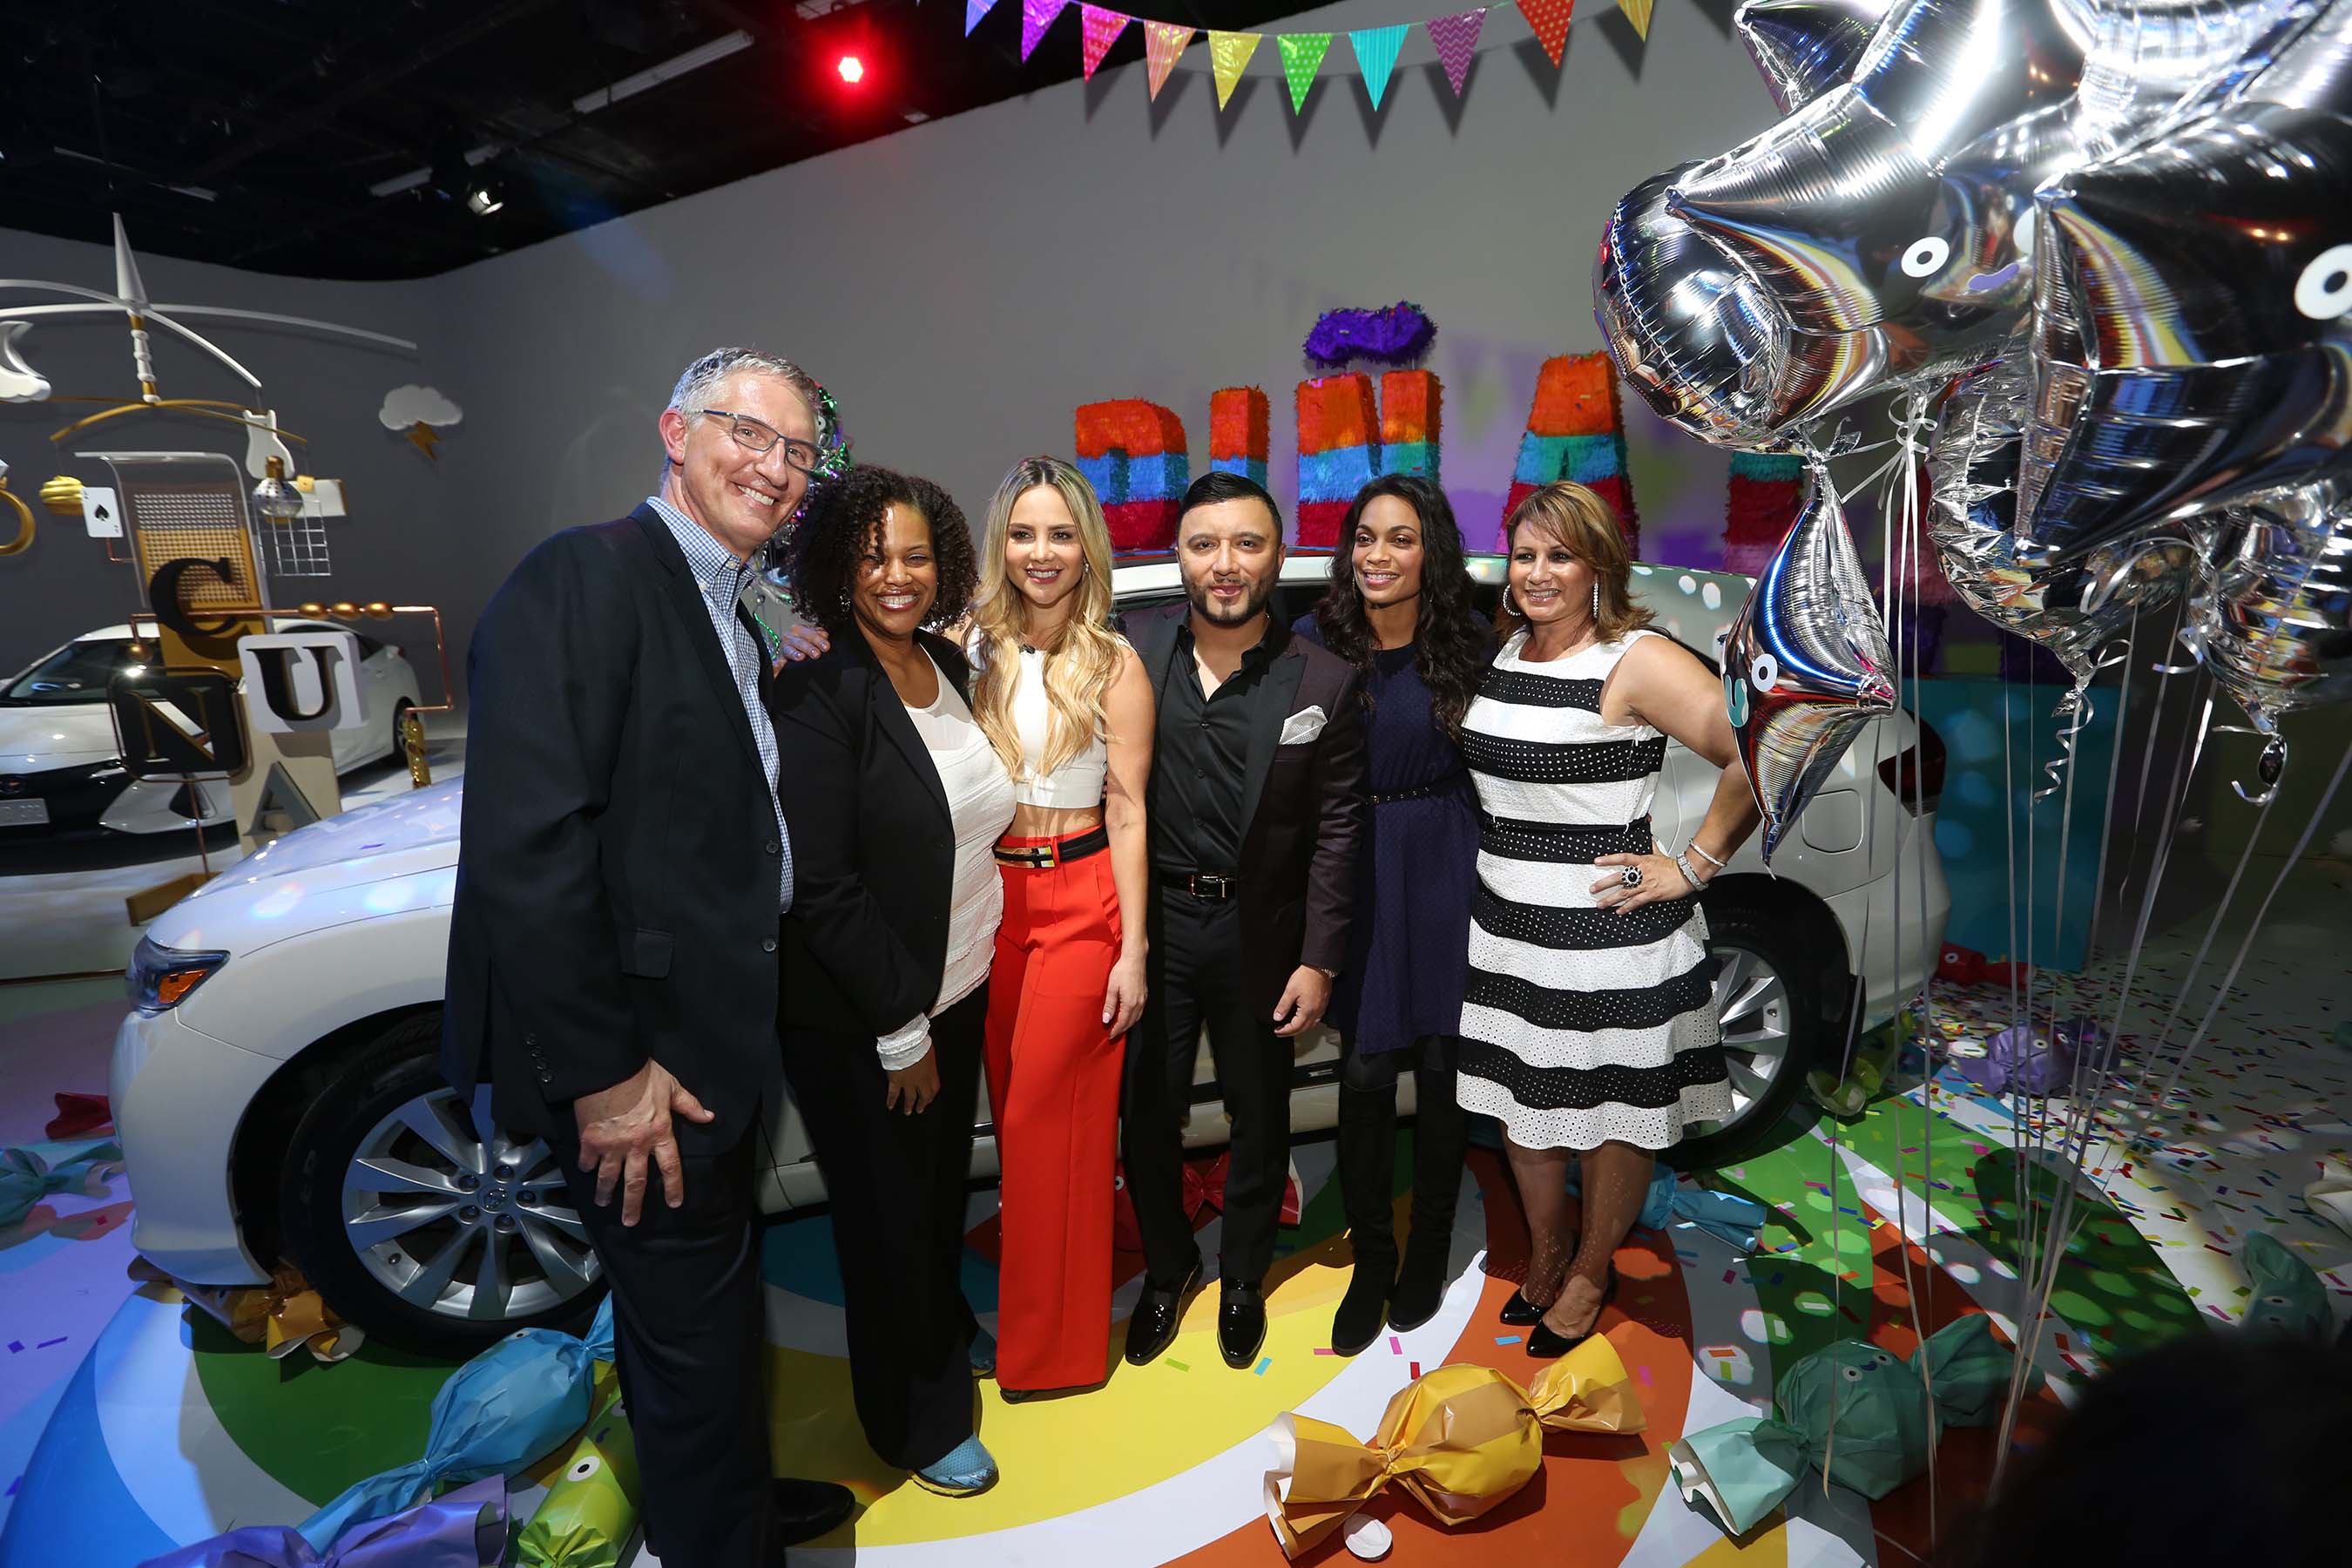 Toyota executives Jim Mooney, Mia Phillips and Erika Romero were joined by actress and TV presenter Ximena Córdoba, DJ Alex Sensation and actress Rosario Dawson at the unveiling of The Book of Names.